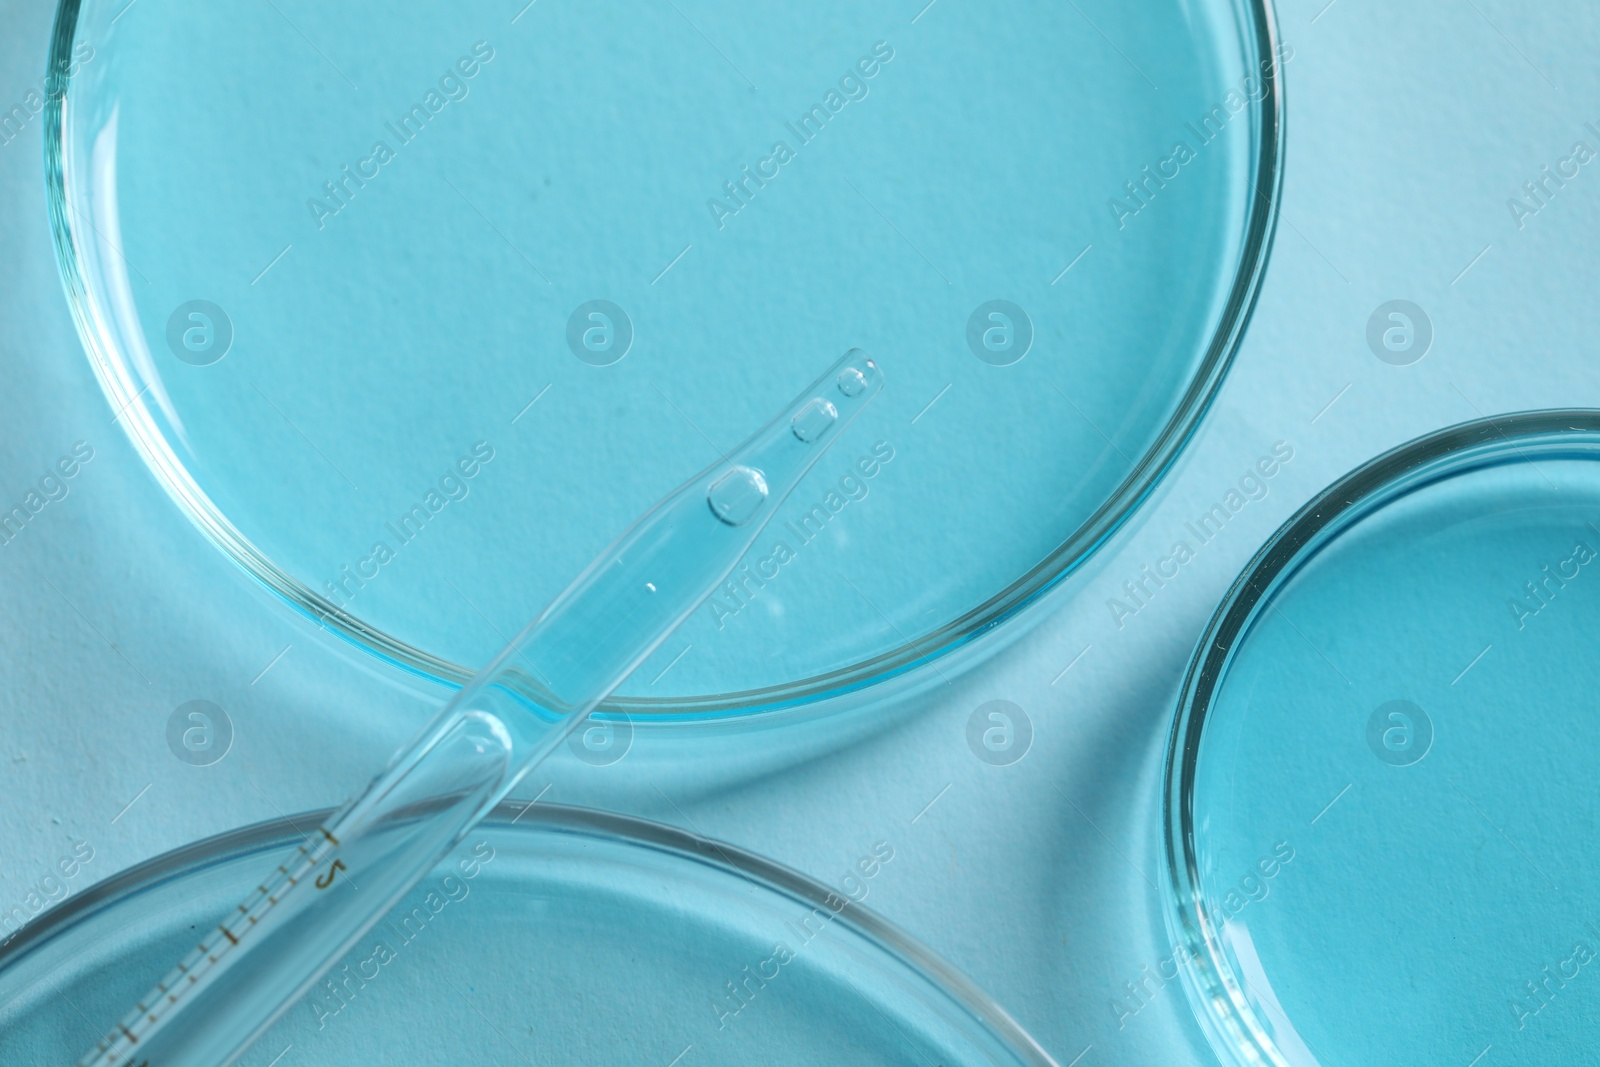 Photo of Measuring pipette and petri dishes on light blue table, flat lay